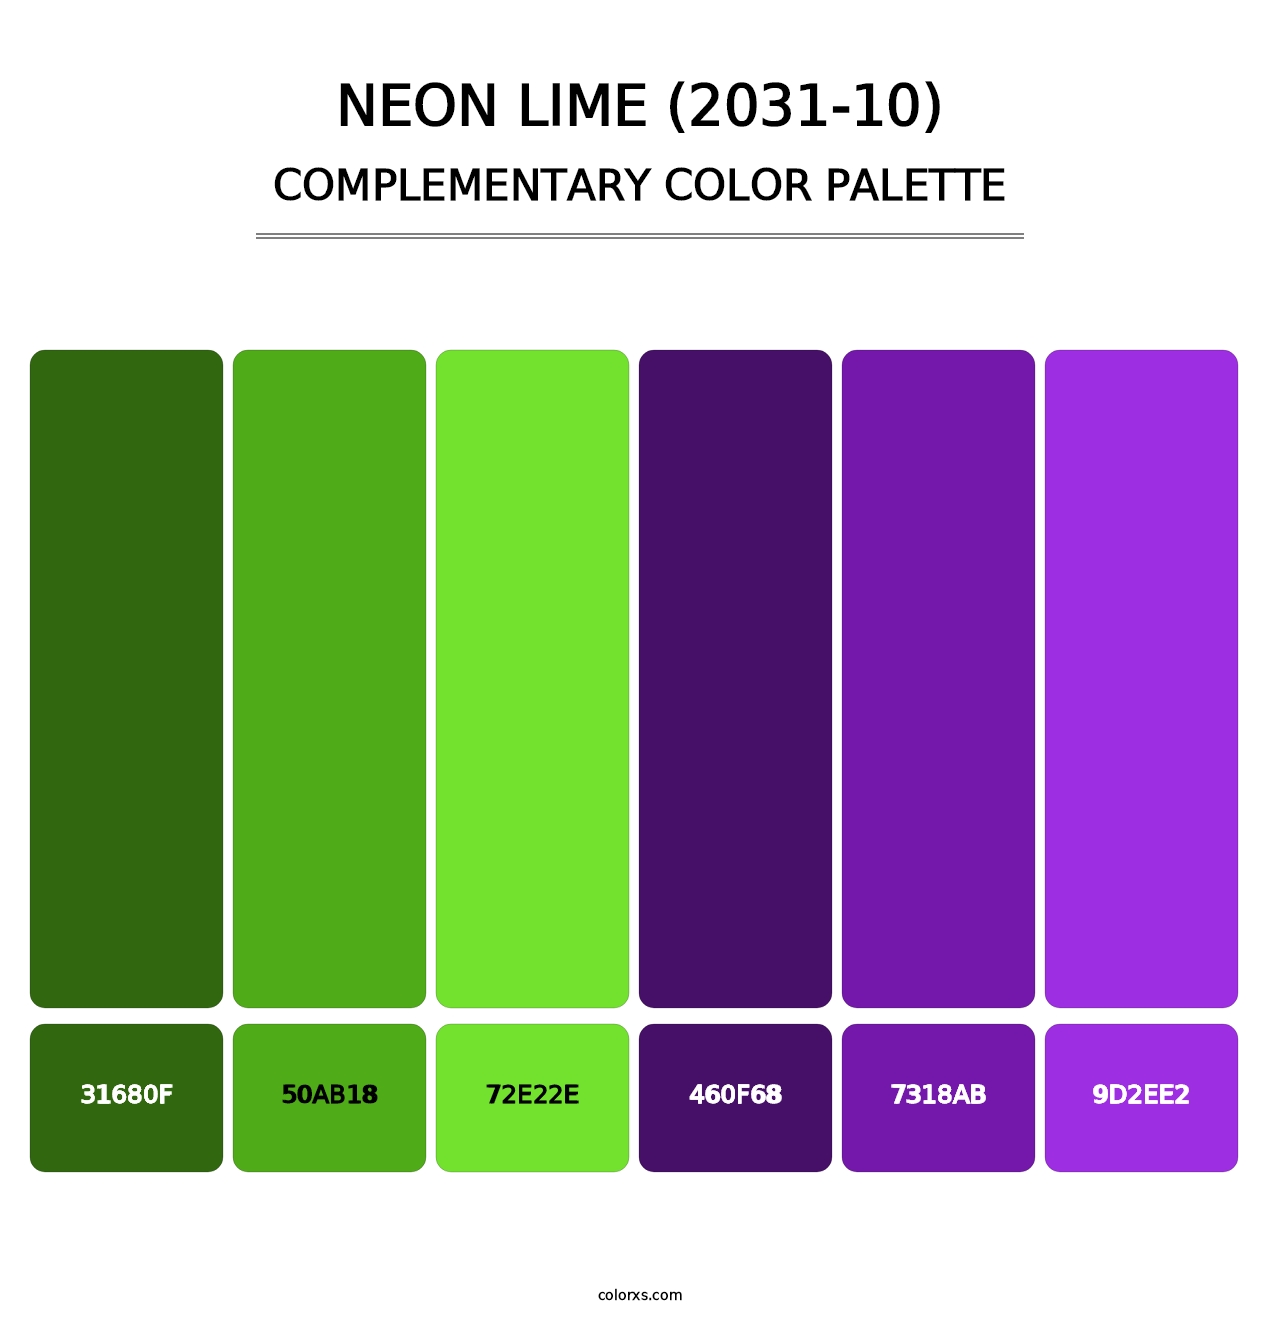 Neon Lime (2031-10) - Complementary Color Palette